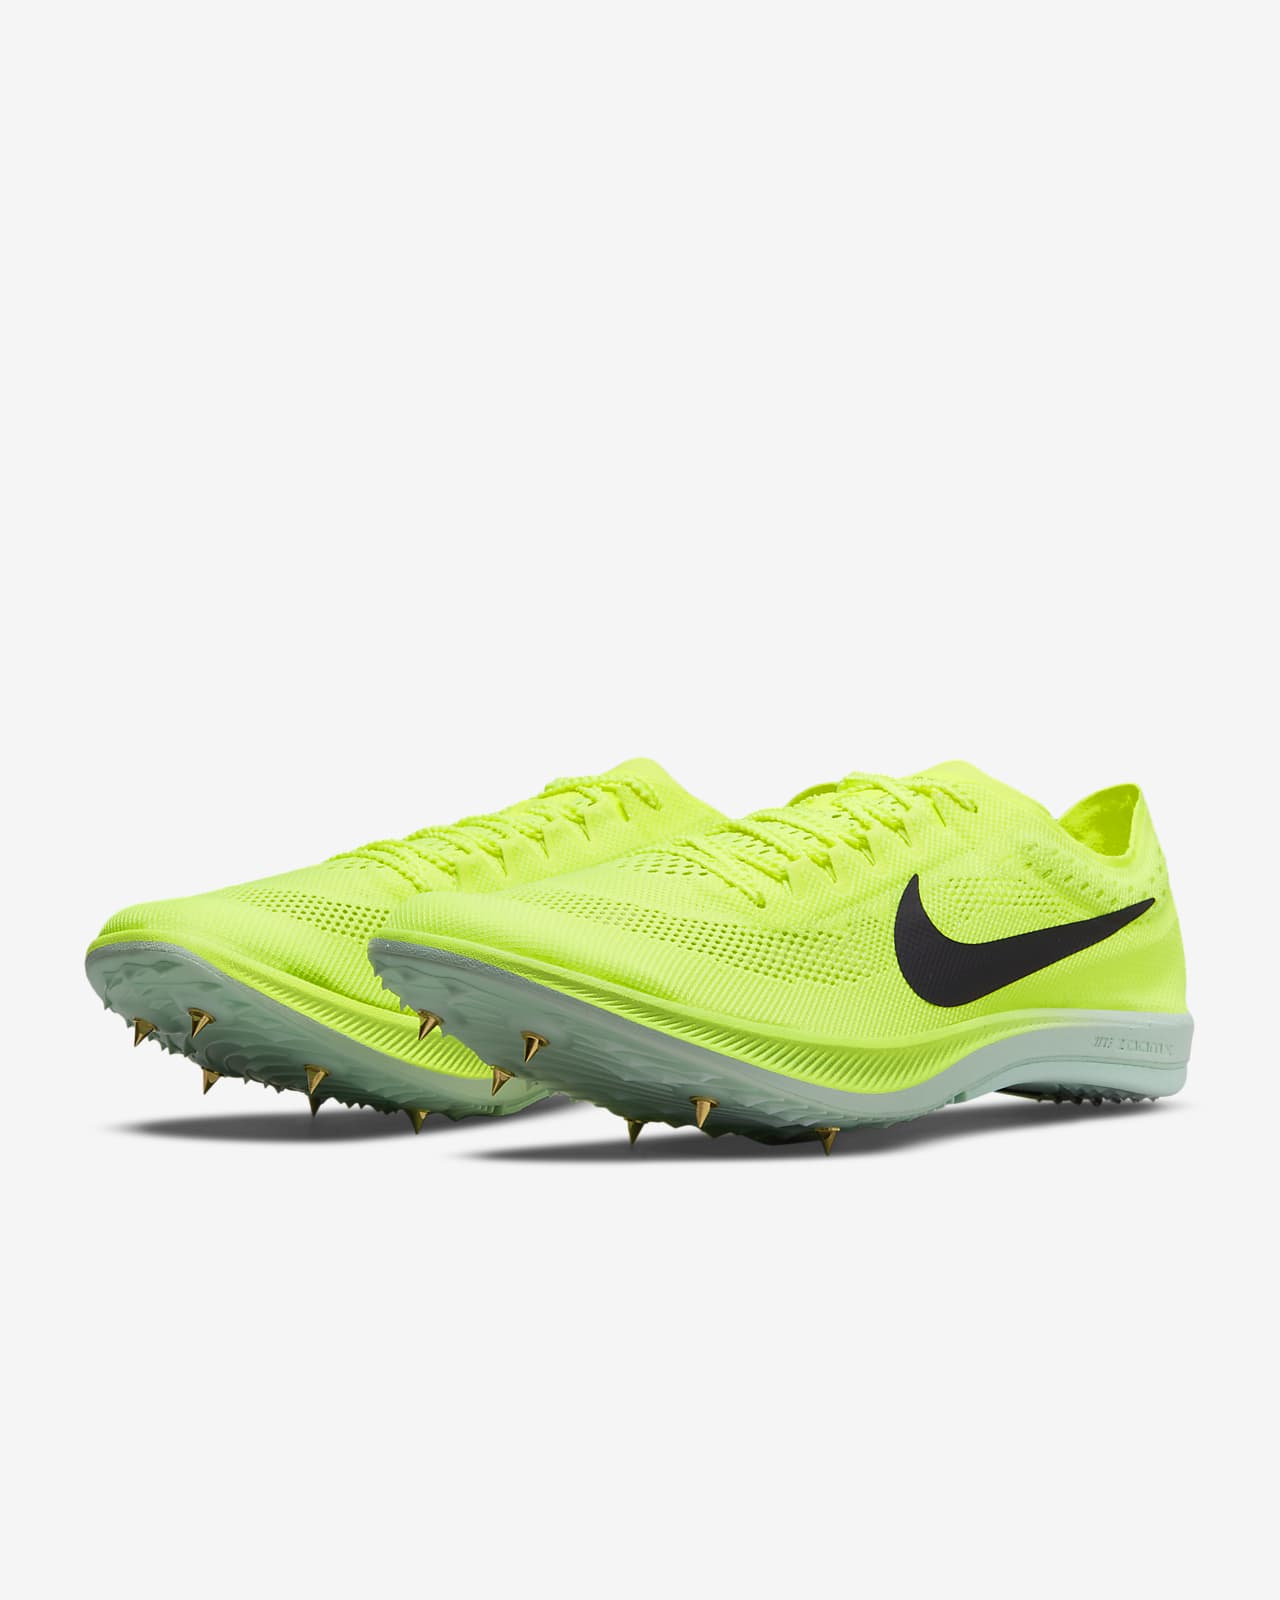 NIKE ZOOMX DRAGONFLY 25.0